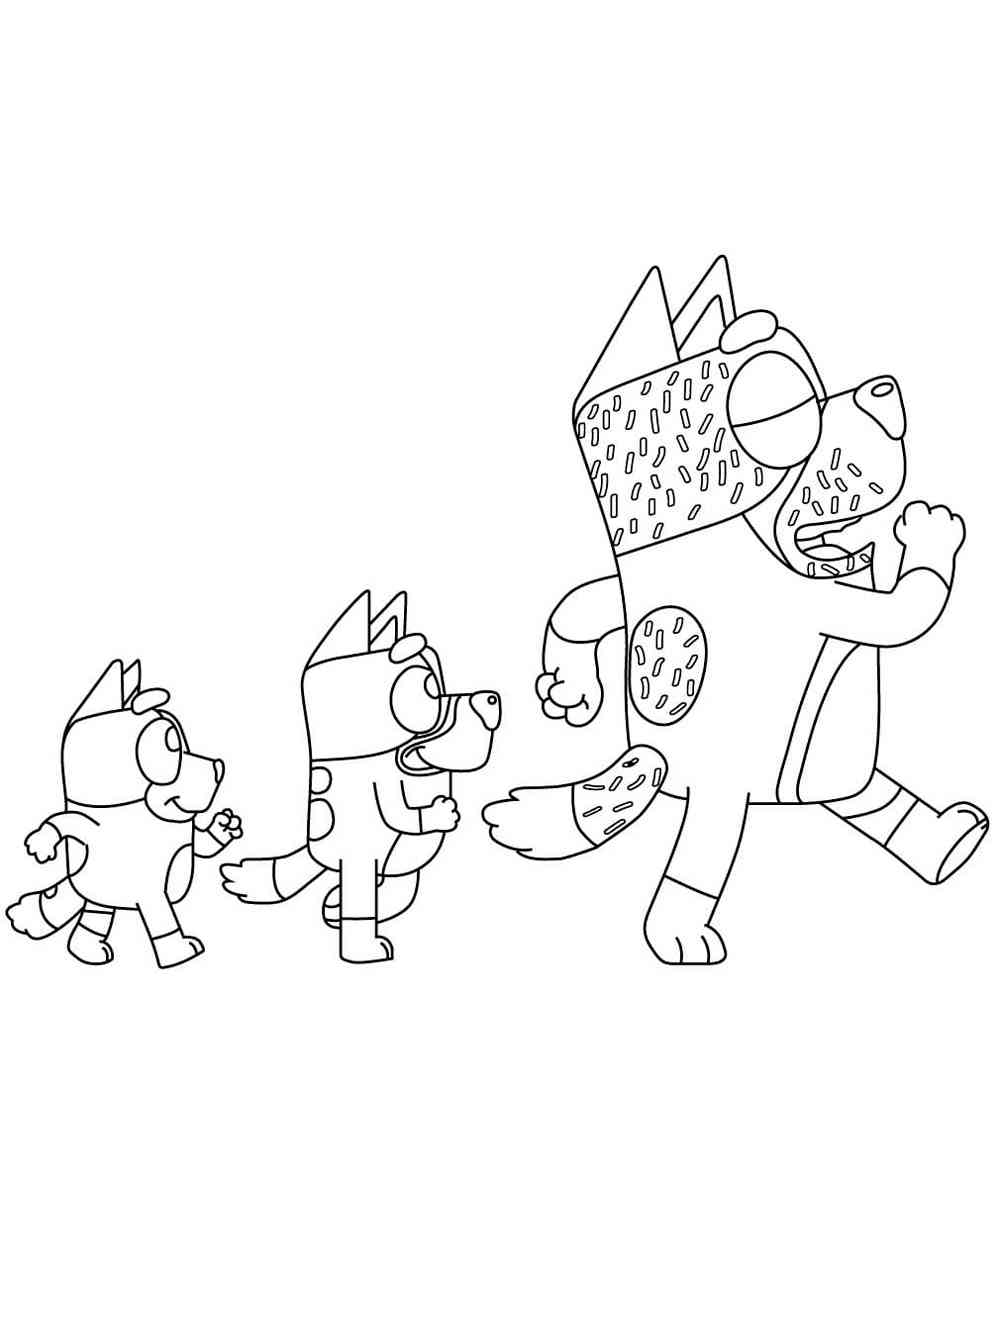 Bluey 23 coloring page